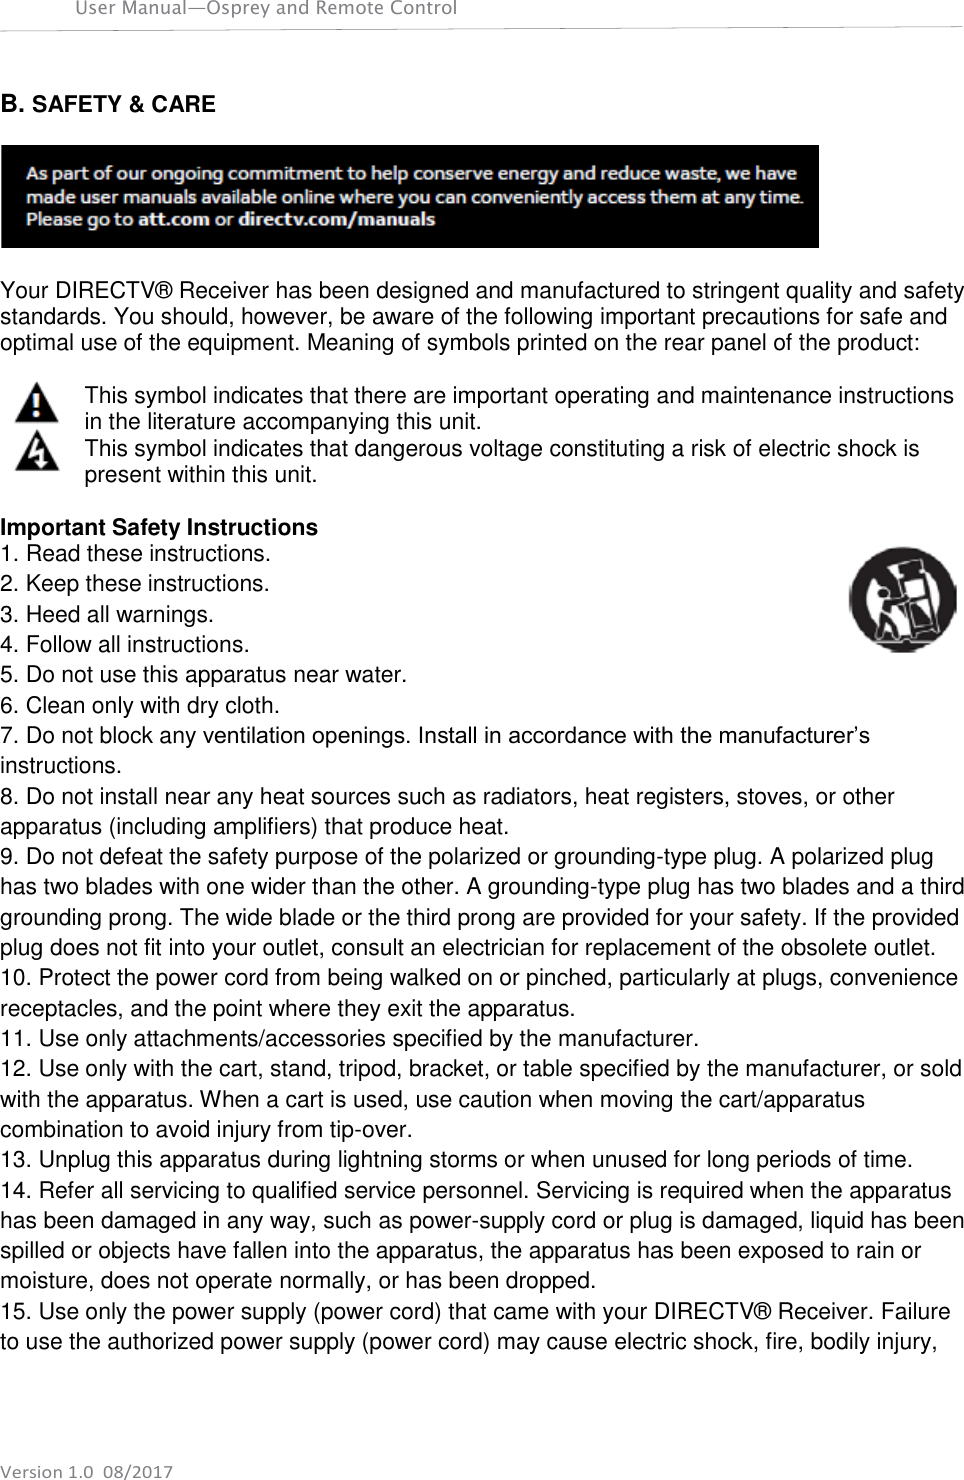 User Manual—Osprey and Remote Control    Version 1.0  08/2017 B. SAFETY &amp; CARE    Your DIRECTV® Receiver has been designed and manufactured to stringent quality and safety standards. You should, however, be aware of the following important precautions for safe and optimal use of the equipment. Meaning of symbols printed on the rear panel of the product:  This symbol indicates that there are important operating and maintenance instructions in the literature accompanying this unit. This symbol indicates that dangerous voltage constituting a risk of electric shock is present within this unit.  Important Safety Instructions 1. Read these instructions. 2. Keep these instructions. 3. Heed all warnings. 4. Follow all instructions. 5. Do not use this apparatus near water. 6. Clean only with dry cloth. 7. Do not block any ventilation openings. Install in accordance with the manufacturer’s instructions. 8. Do not install near any heat sources such as radiators, heat registers, stoves, or other apparatus (including amplifiers) that produce heat. 9. Do not defeat the safety purpose of the polarized or grounding-type plug. A polarized plug has two blades with one wider than the other. A grounding-type plug has two blades and a third grounding prong. The wide blade or the third prong are provided for your safety. If the provided plug does not fit into your outlet, consult an electrician for replacement of the obsolete outlet. 10. Protect the power cord from being walked on or pinched, particularly at plugs, convenience receptacles, and the point where they exit the apparatus. 11. Use only attachments/accessories specified by the manufacturer. 12. Use only with the cart, stand, tripod, bracket, or table specified by the manufacturer, or sold with the apparatus. When a cart is used, use caution when moving the cart/apparatus combination to avoid injury from tip-over. 13. Unplug this apparatus during lightning storms or when unused for long periods of time. 14. Refer all servicing to qualified service personnel. Servicing is required when the apparatus has been damaged in any way, such as power-supply cord or plug is damaged, liquid has been spilled or objects have fallen into the apparatus, the apparatus has been exposed to rain or moisture, does not operate normally, or has been dropped. 15. Use only the power supply (power cord) that came with your DIRECTV® Receiver. Failure to use the authorized power supply (power cord) may cause electric shock, fire, bodily injury, 